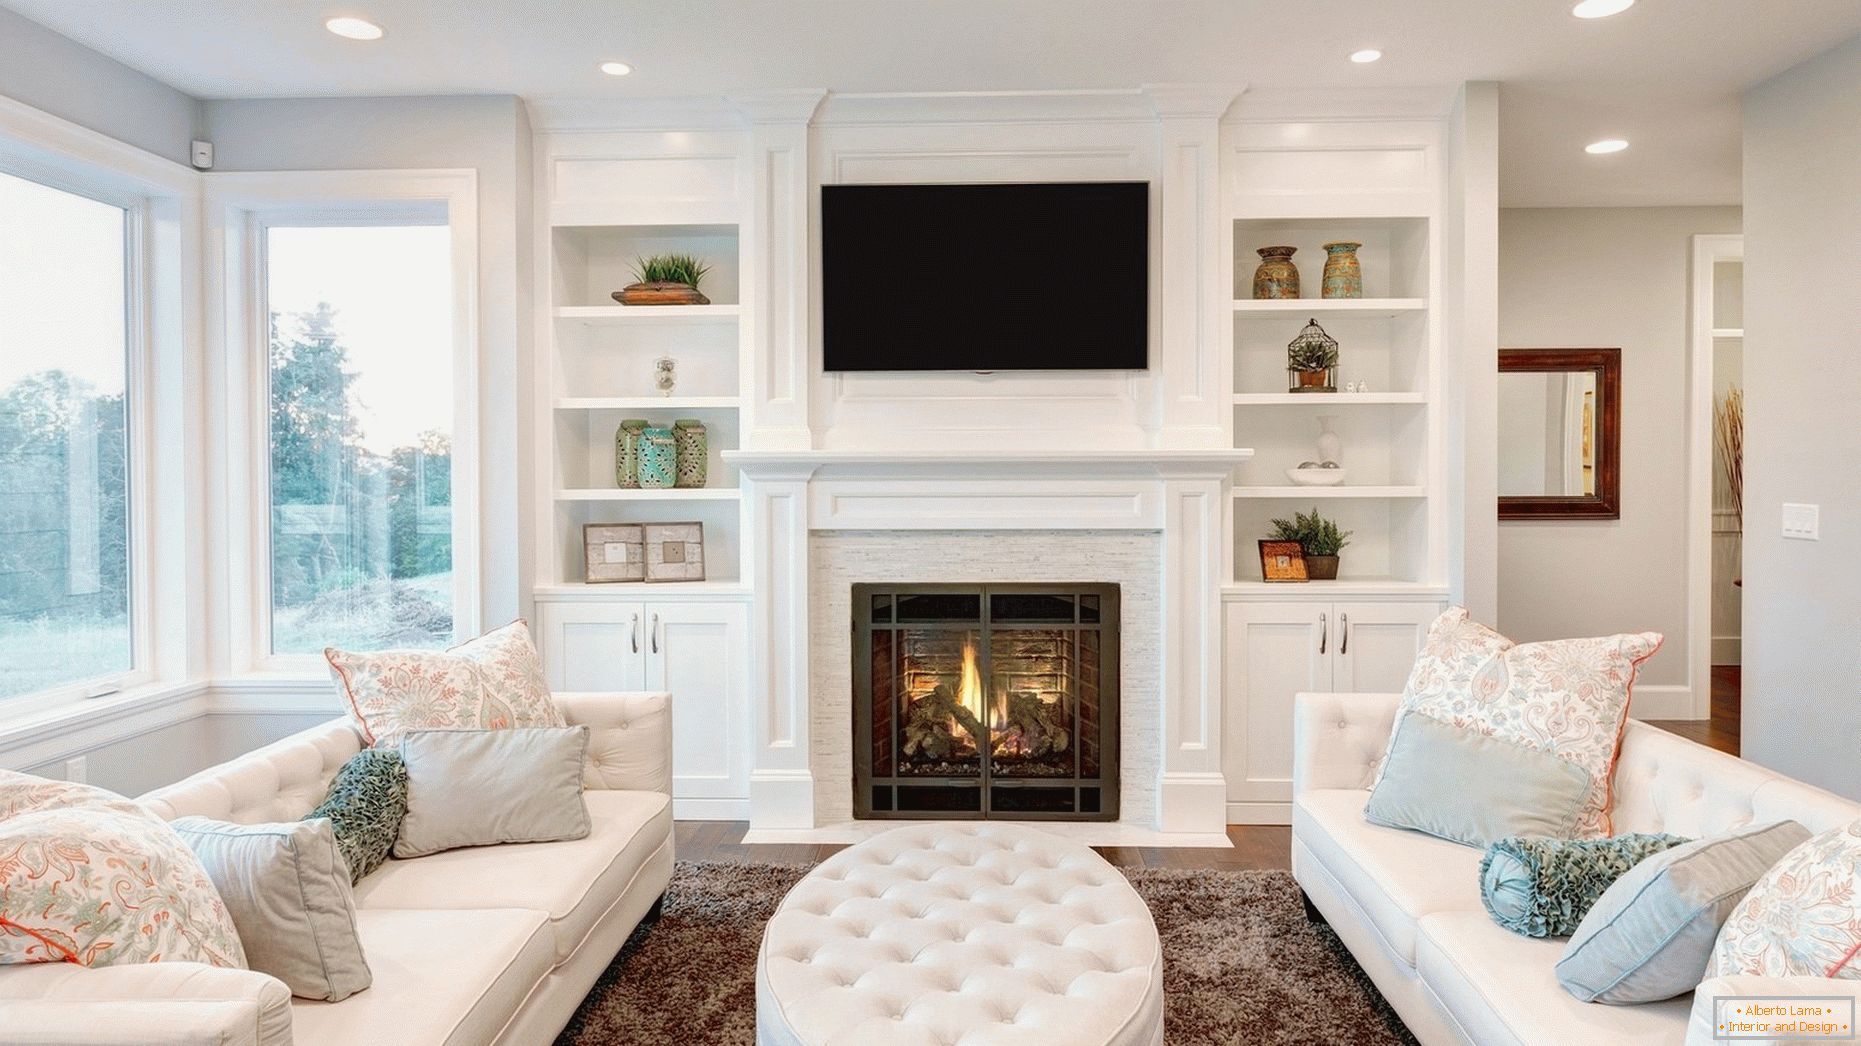 White furniture in the interior of the living room